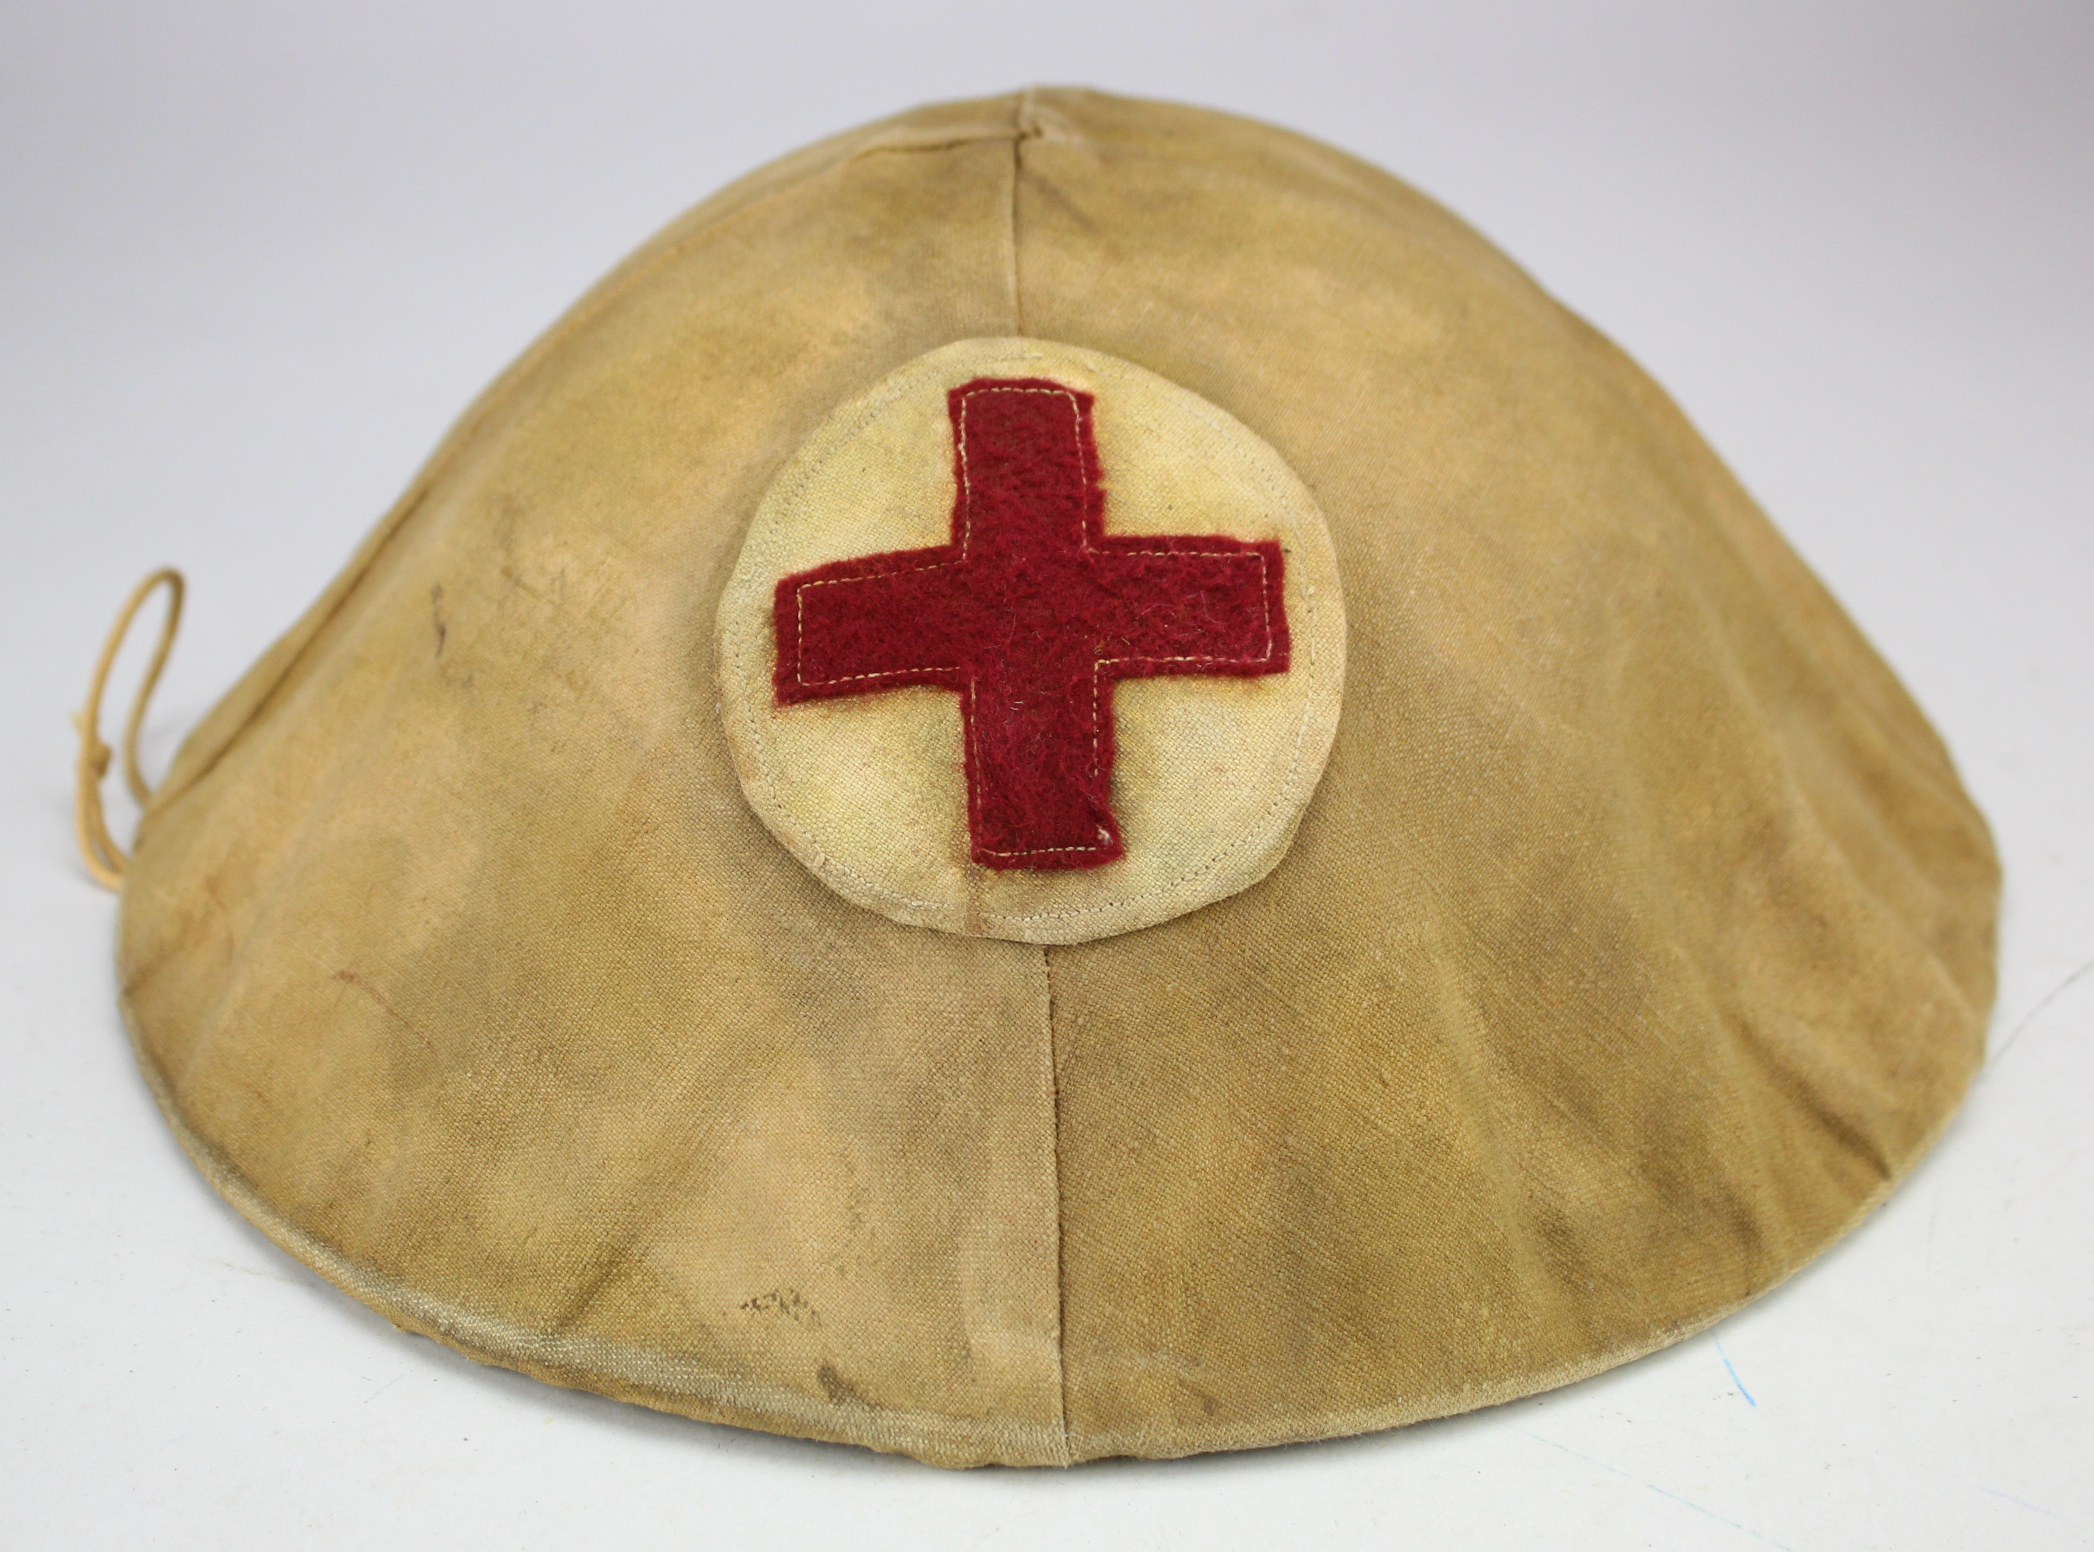 British WW1 Brodie steel helmet complete with liner and chin strap, with a cloth cover tied on, this